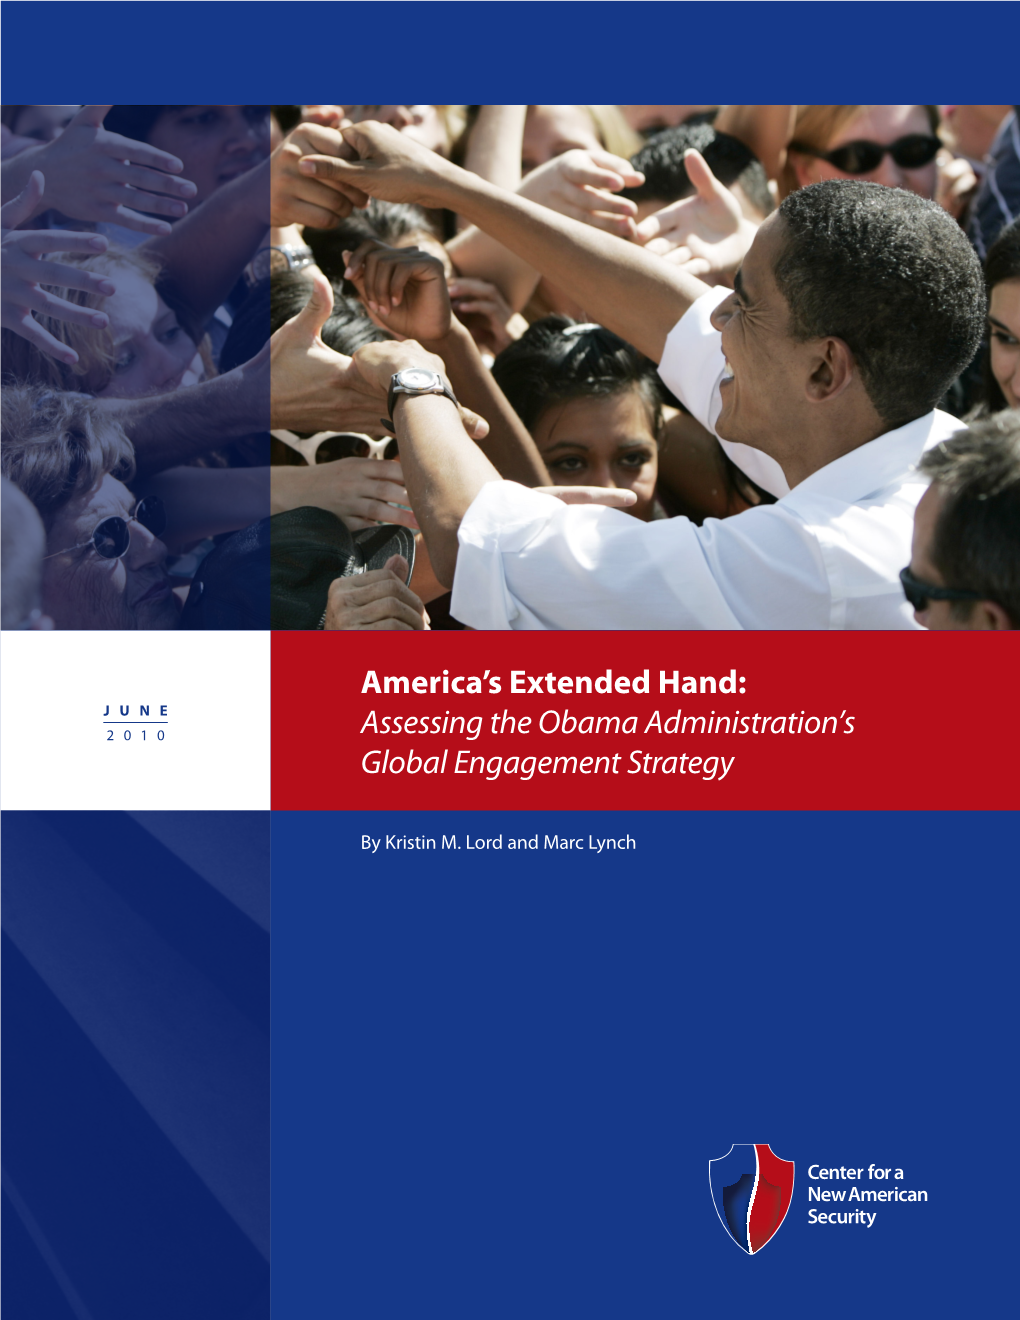 Assessing the Obama Administration's Global Engagement Strategy